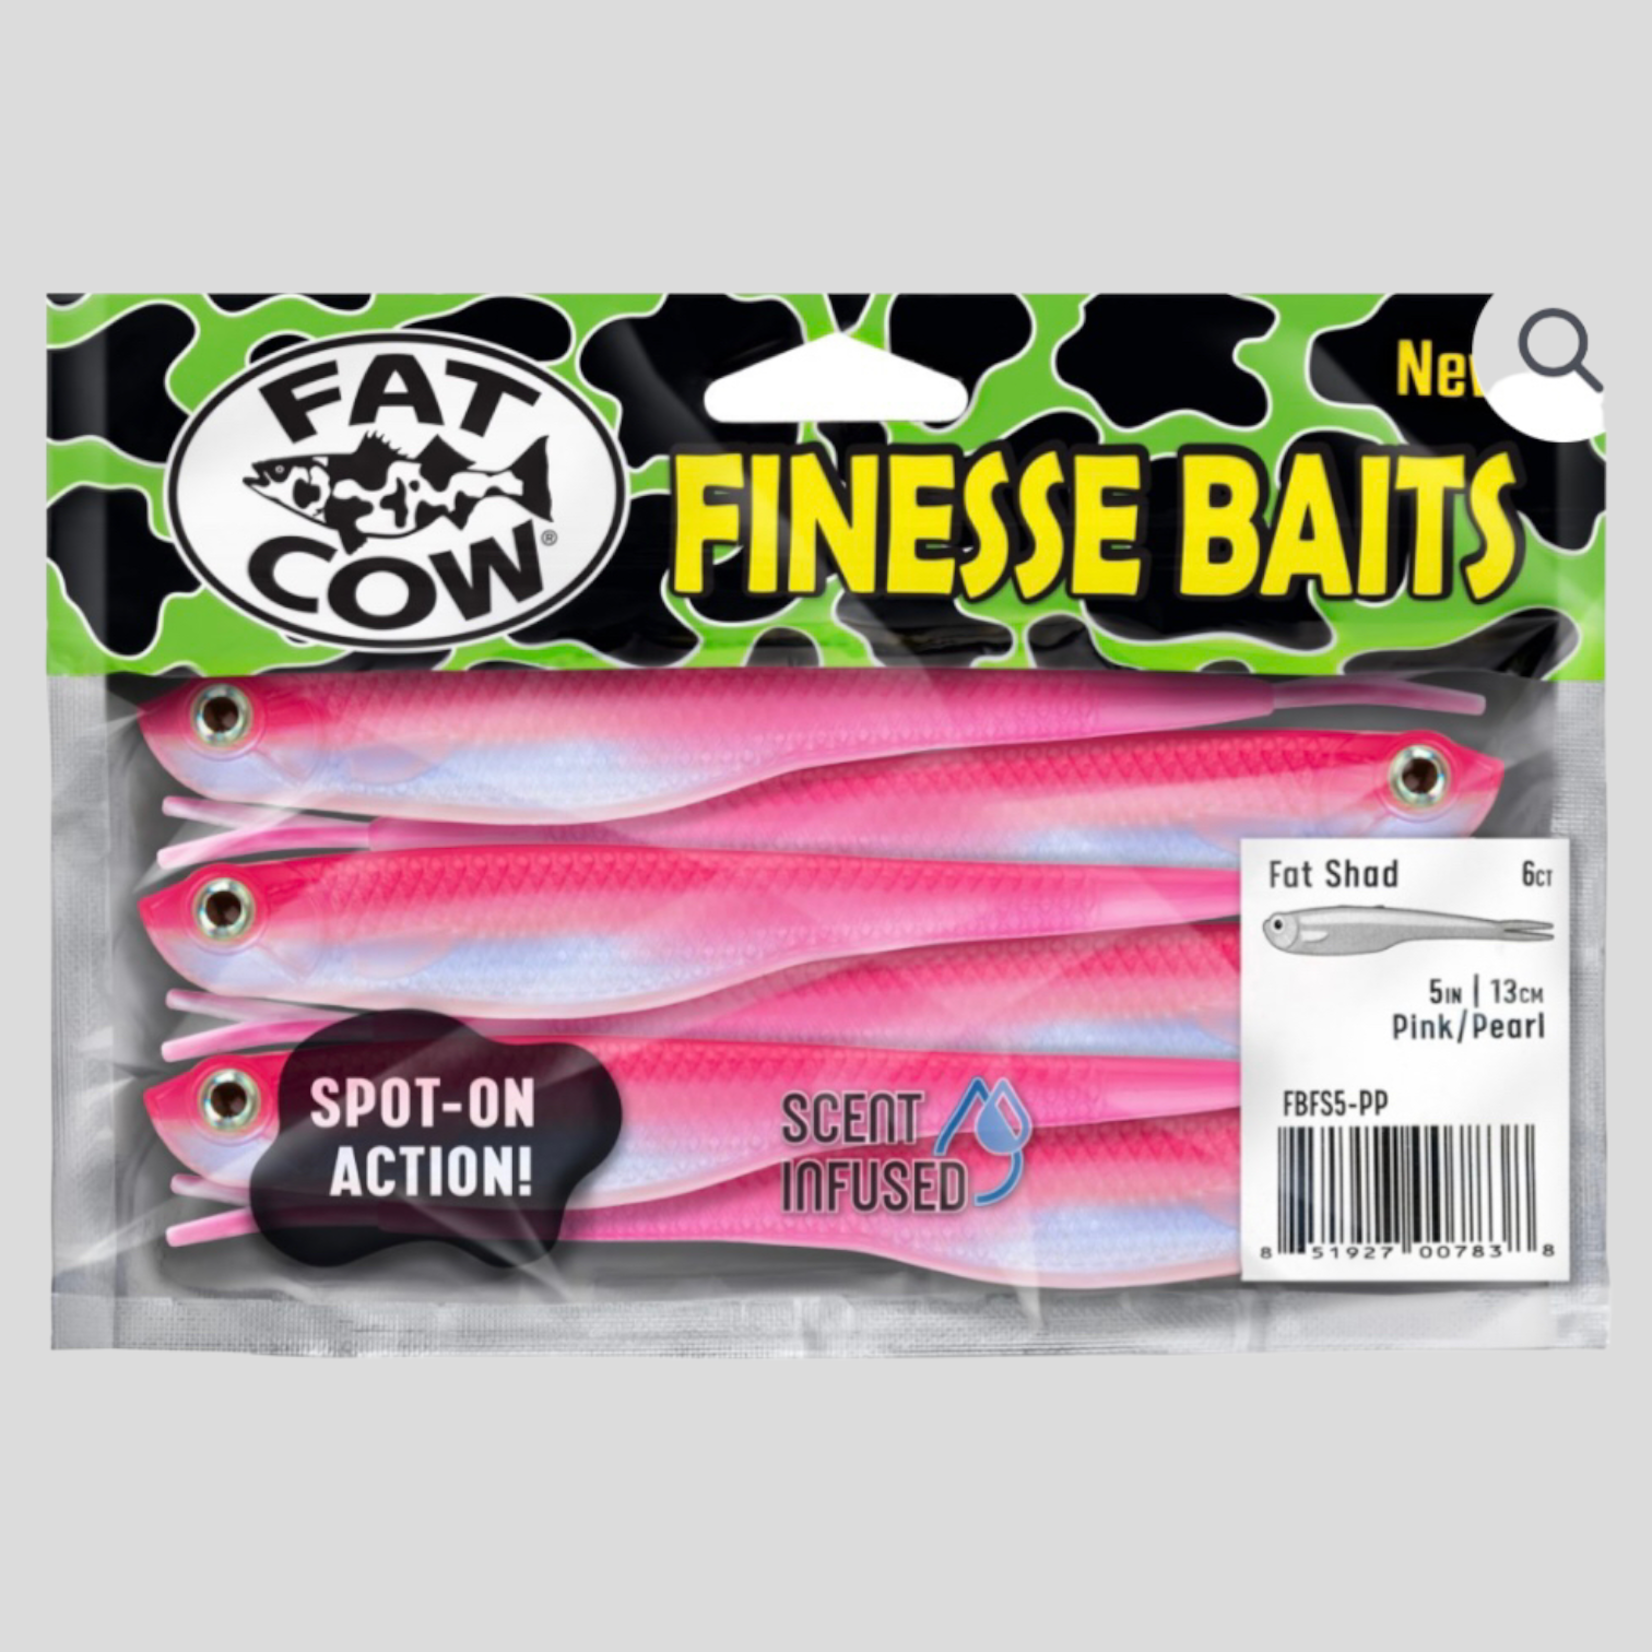 Fat Cow Fat Cow Shad Finesse Baits